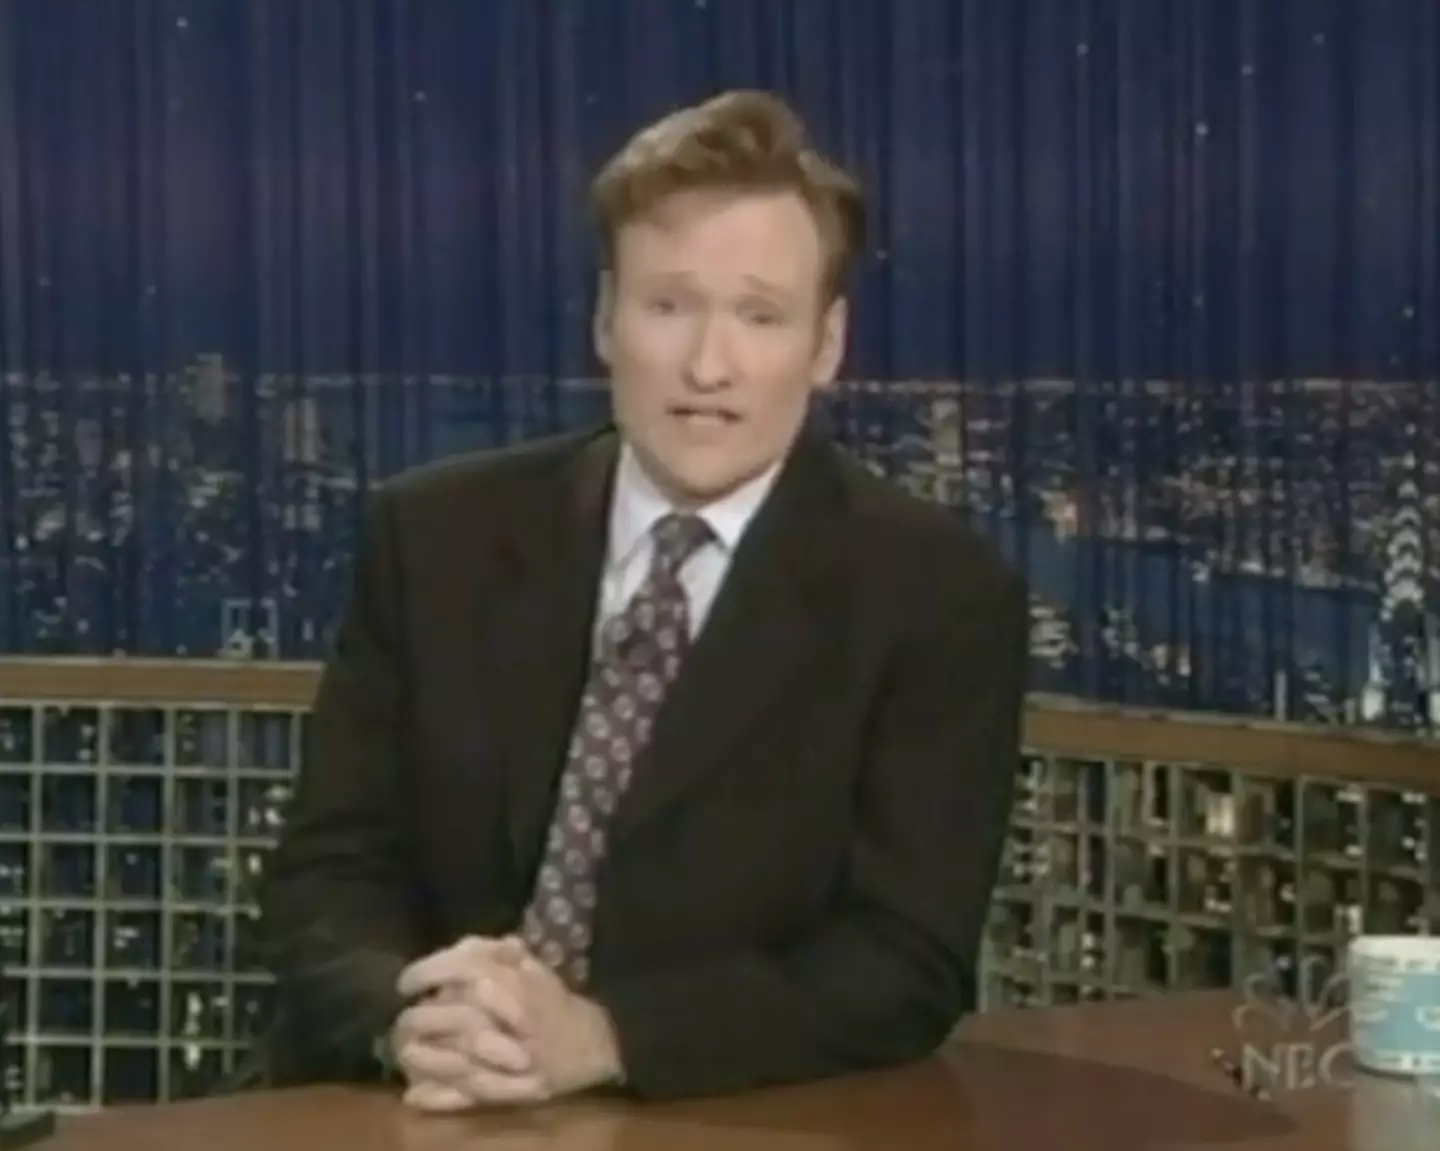 Conan O'Brien also featured a racist sketch about the singer on his show.